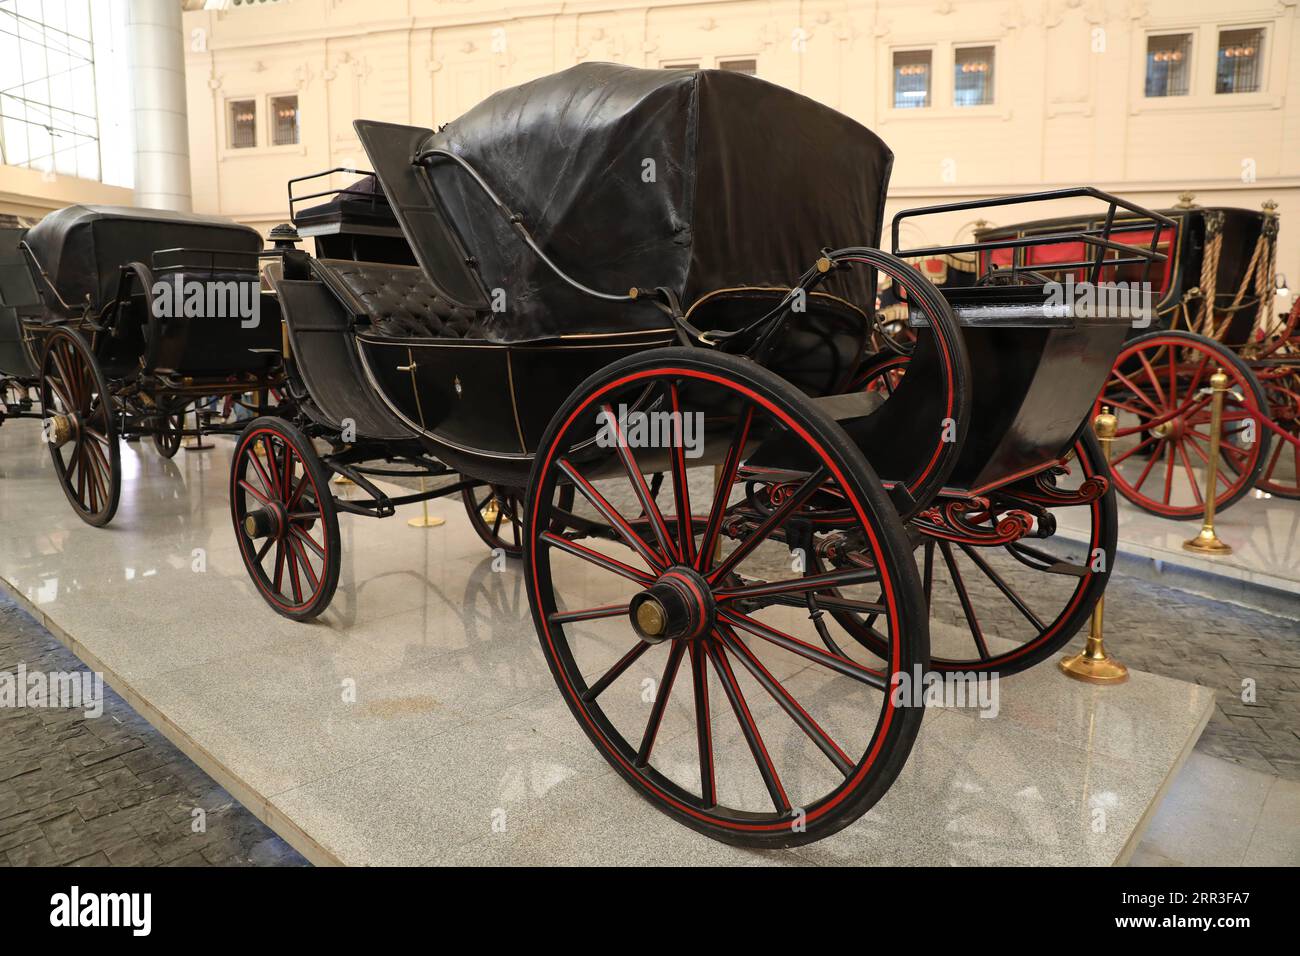 201102 -- CAIRO, Nov. 2, 2020 -- Carriages are displayed in the Royal Carriages Museum in Cairo, Egypt, on Nov. 1, 2020. The Royal Carriages Museum in Cairo reopened to visitors on Oct. 31, 2020 after closure of nearly two decades. The museum houses royal carriages and horse guards accessories of Mohamed Ali dynasty, many of which were exquisite foreign presents to the royal family. The museum closed for restoration in 2001 but soon the project was halted. The restoration project was re-launched by the Egyptian government in 2017.  EGYPT-CAIRO-ROYAL CARRIAGES MUSEUM-REOPEN AhmedxGomaa PUBLICAT Stock Photo